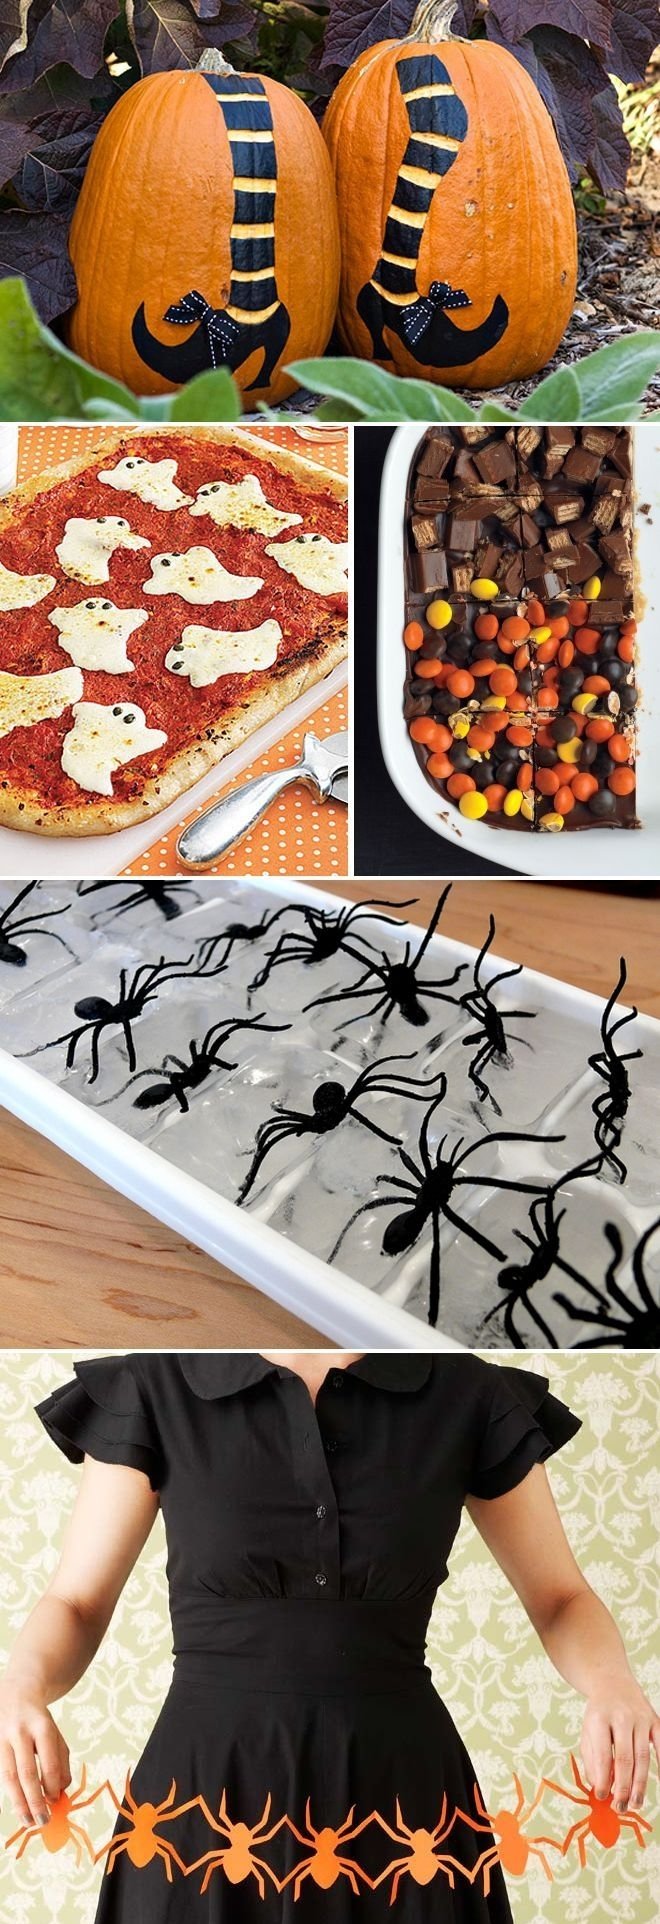 10 Wonderful Halloween Party Ideas For Adults Only 629 best halloween party ideas images on pinterest halloween prop 1 2022